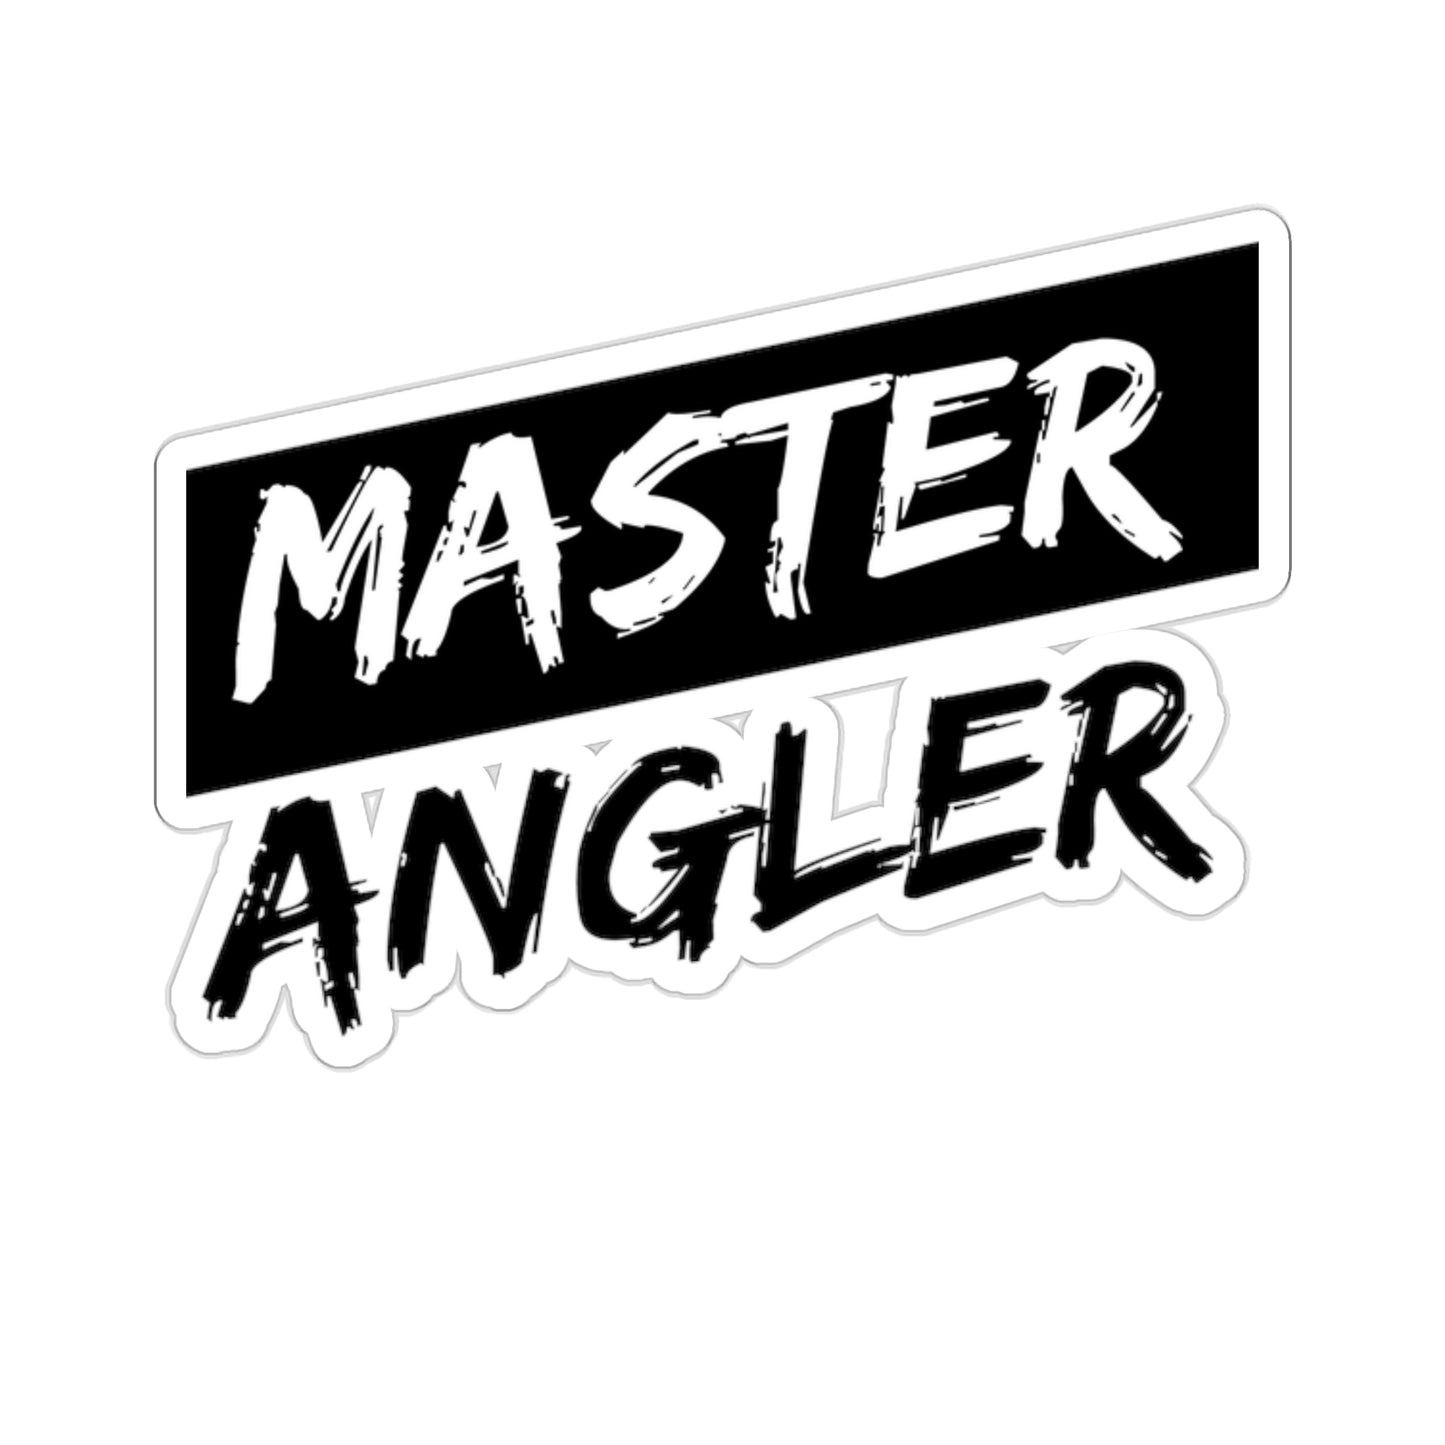 Master Angler Stickers